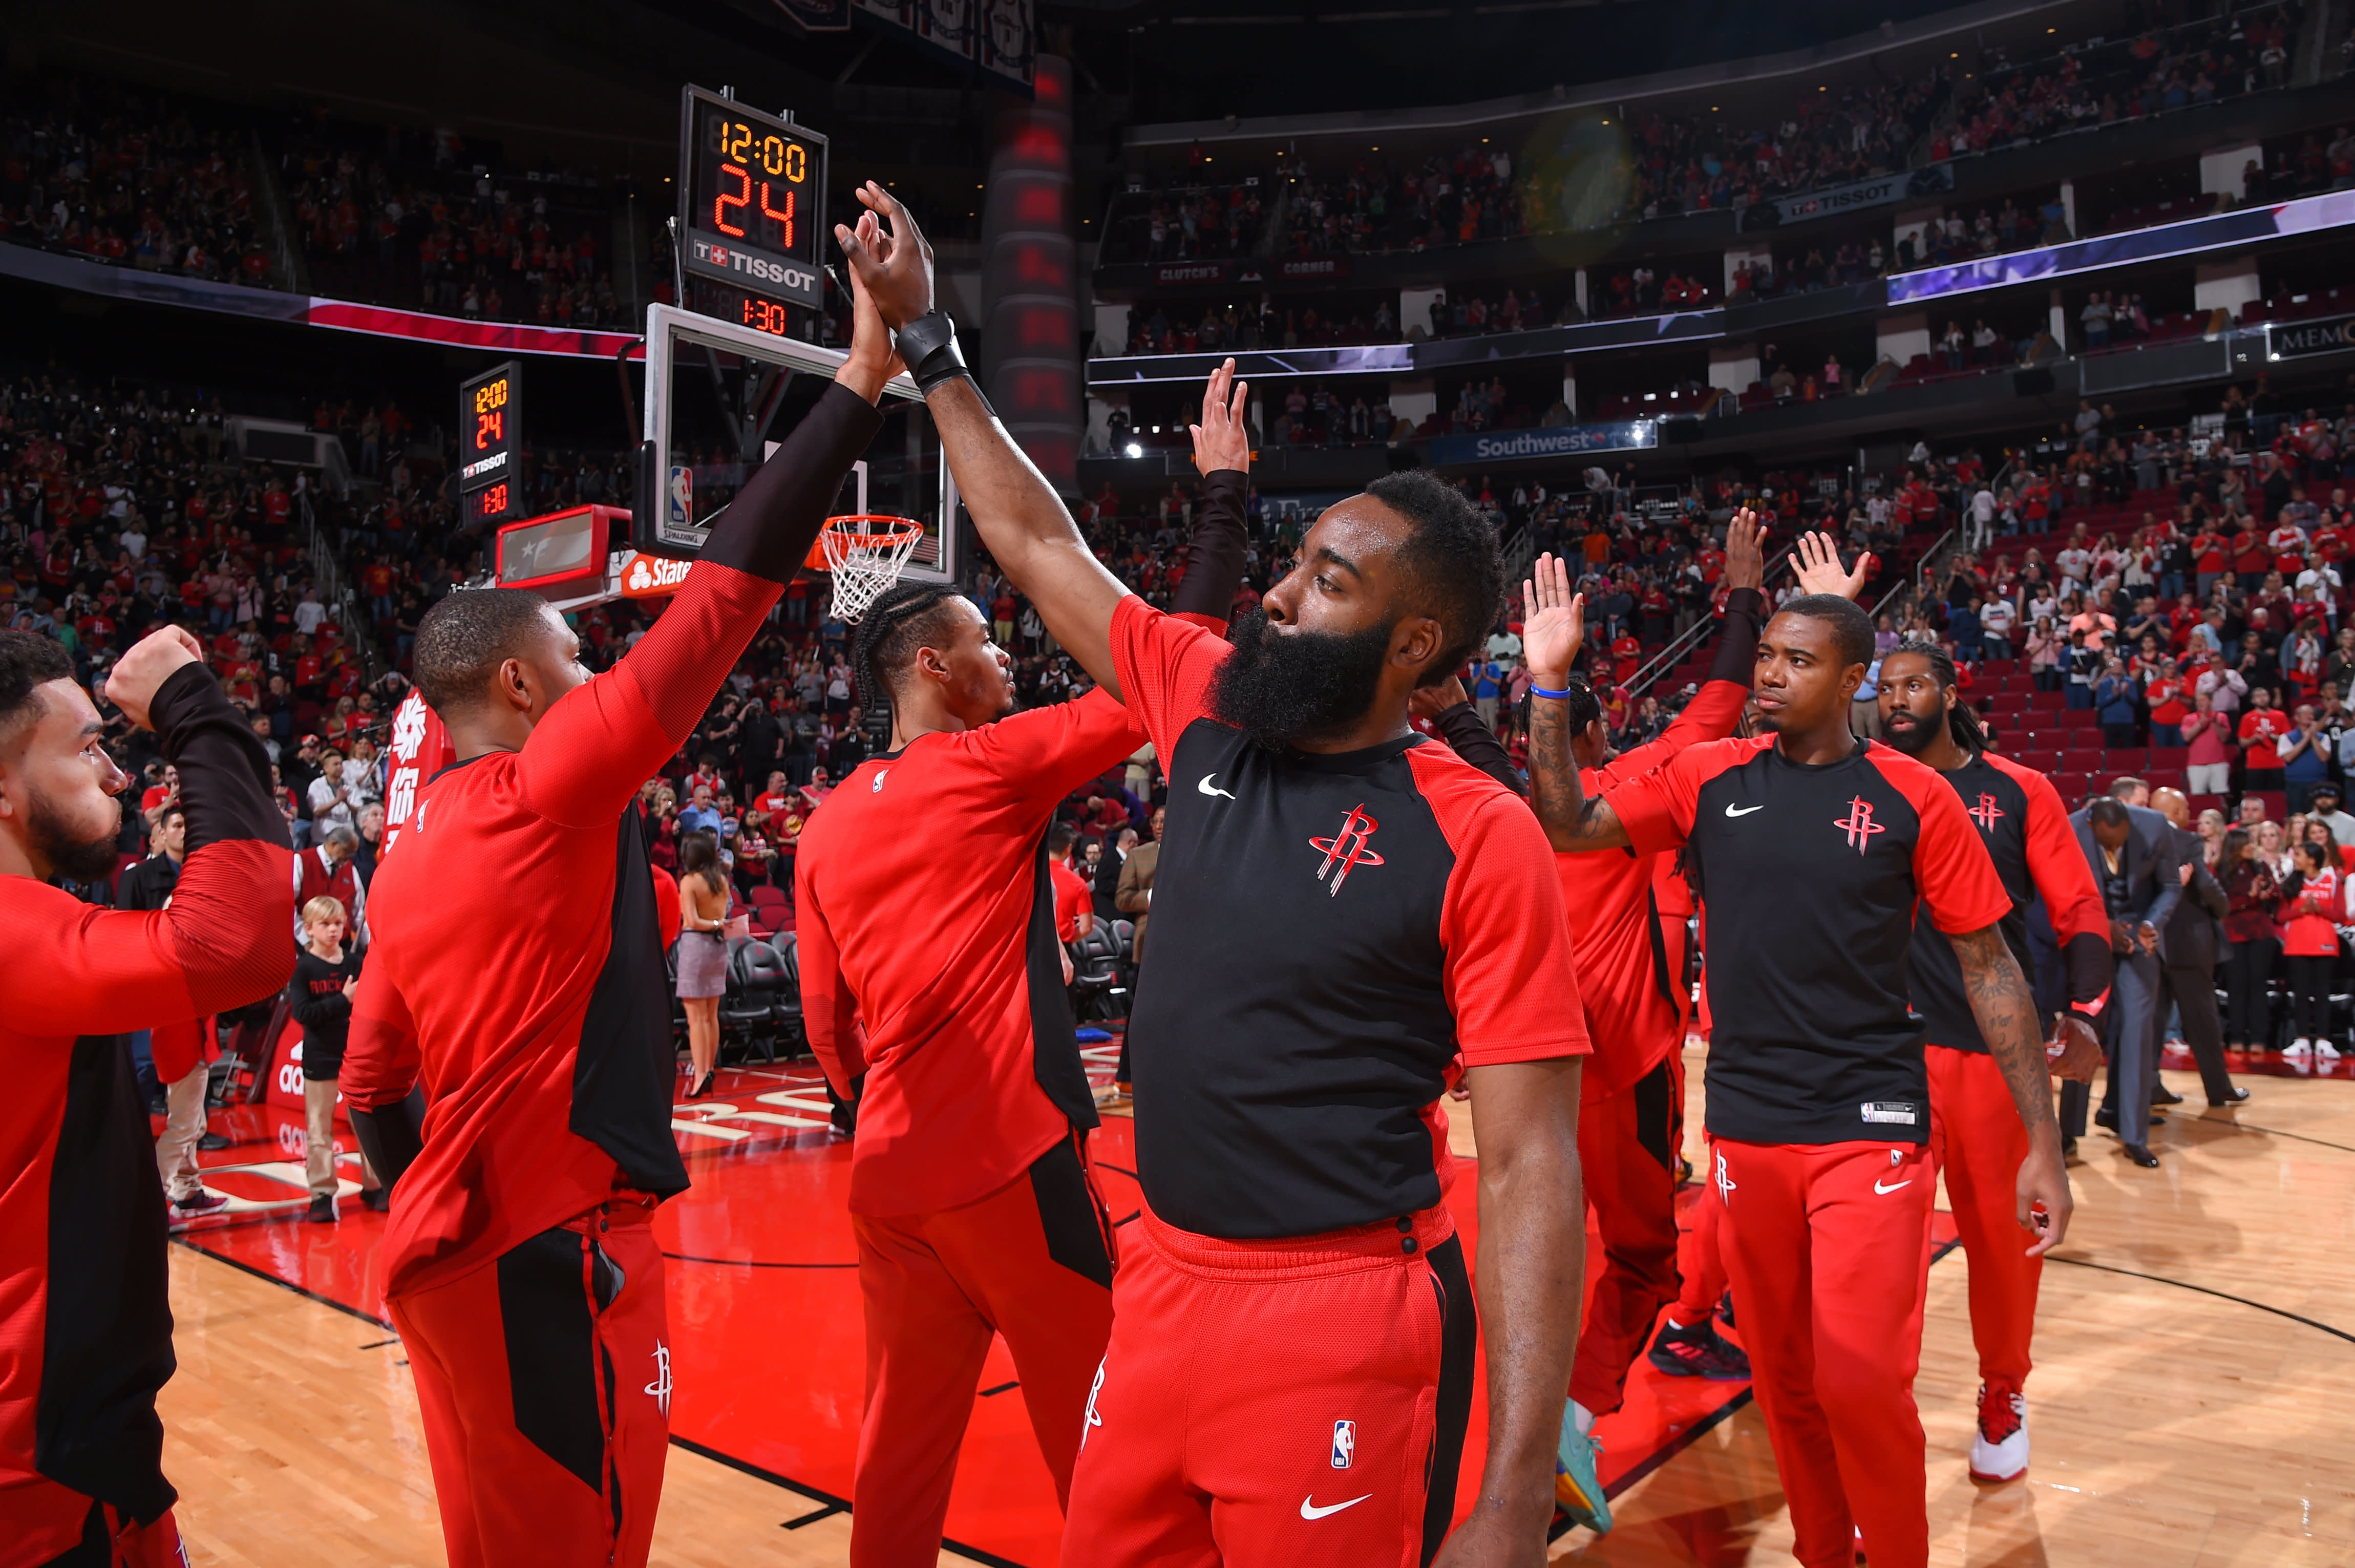 Rockets set new record with 27 threes in single game